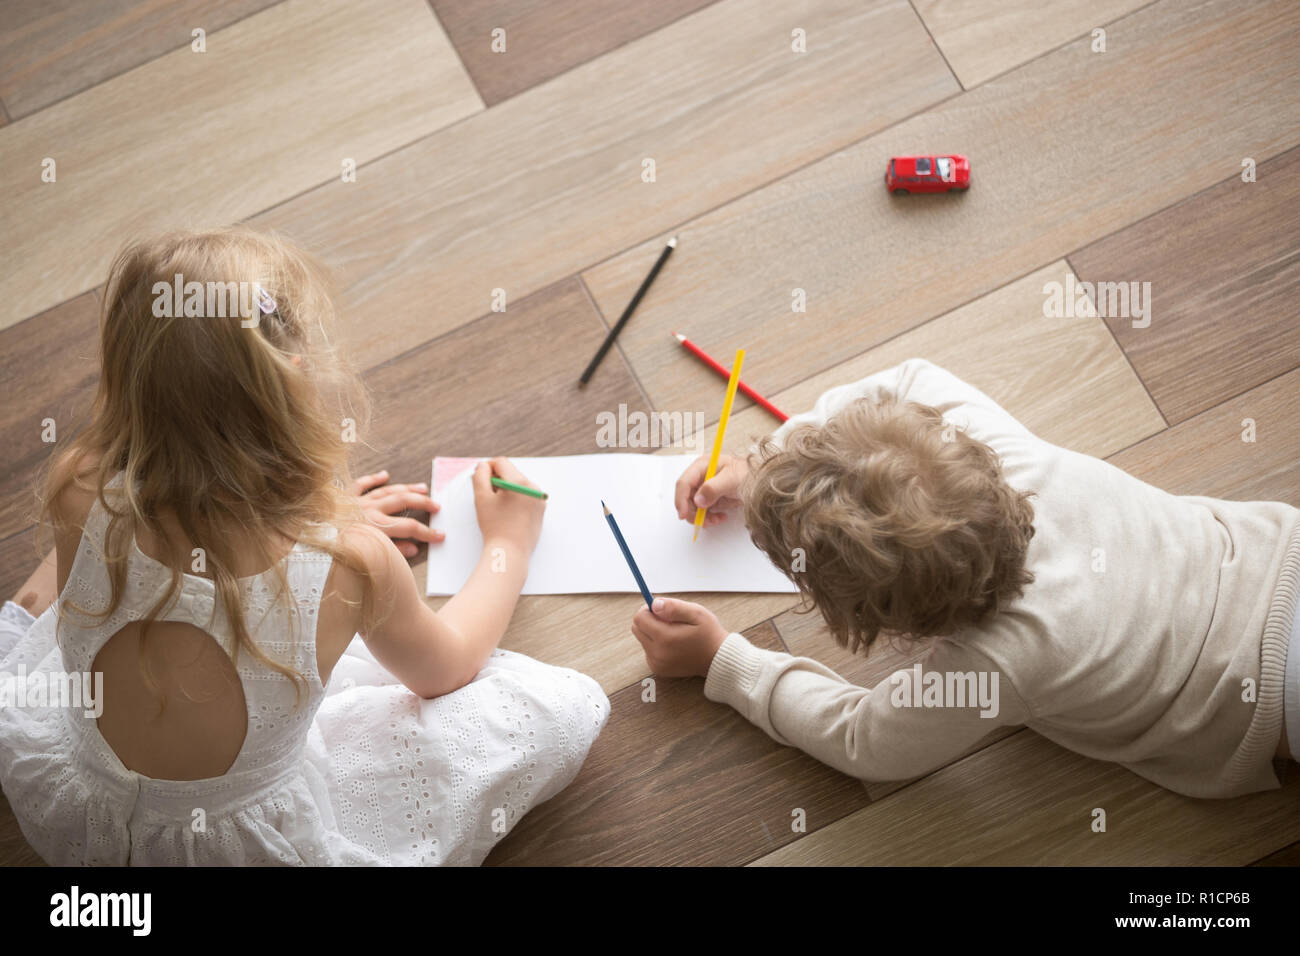 Brother and sister drawing with pencils on sheet in room Stock Photo